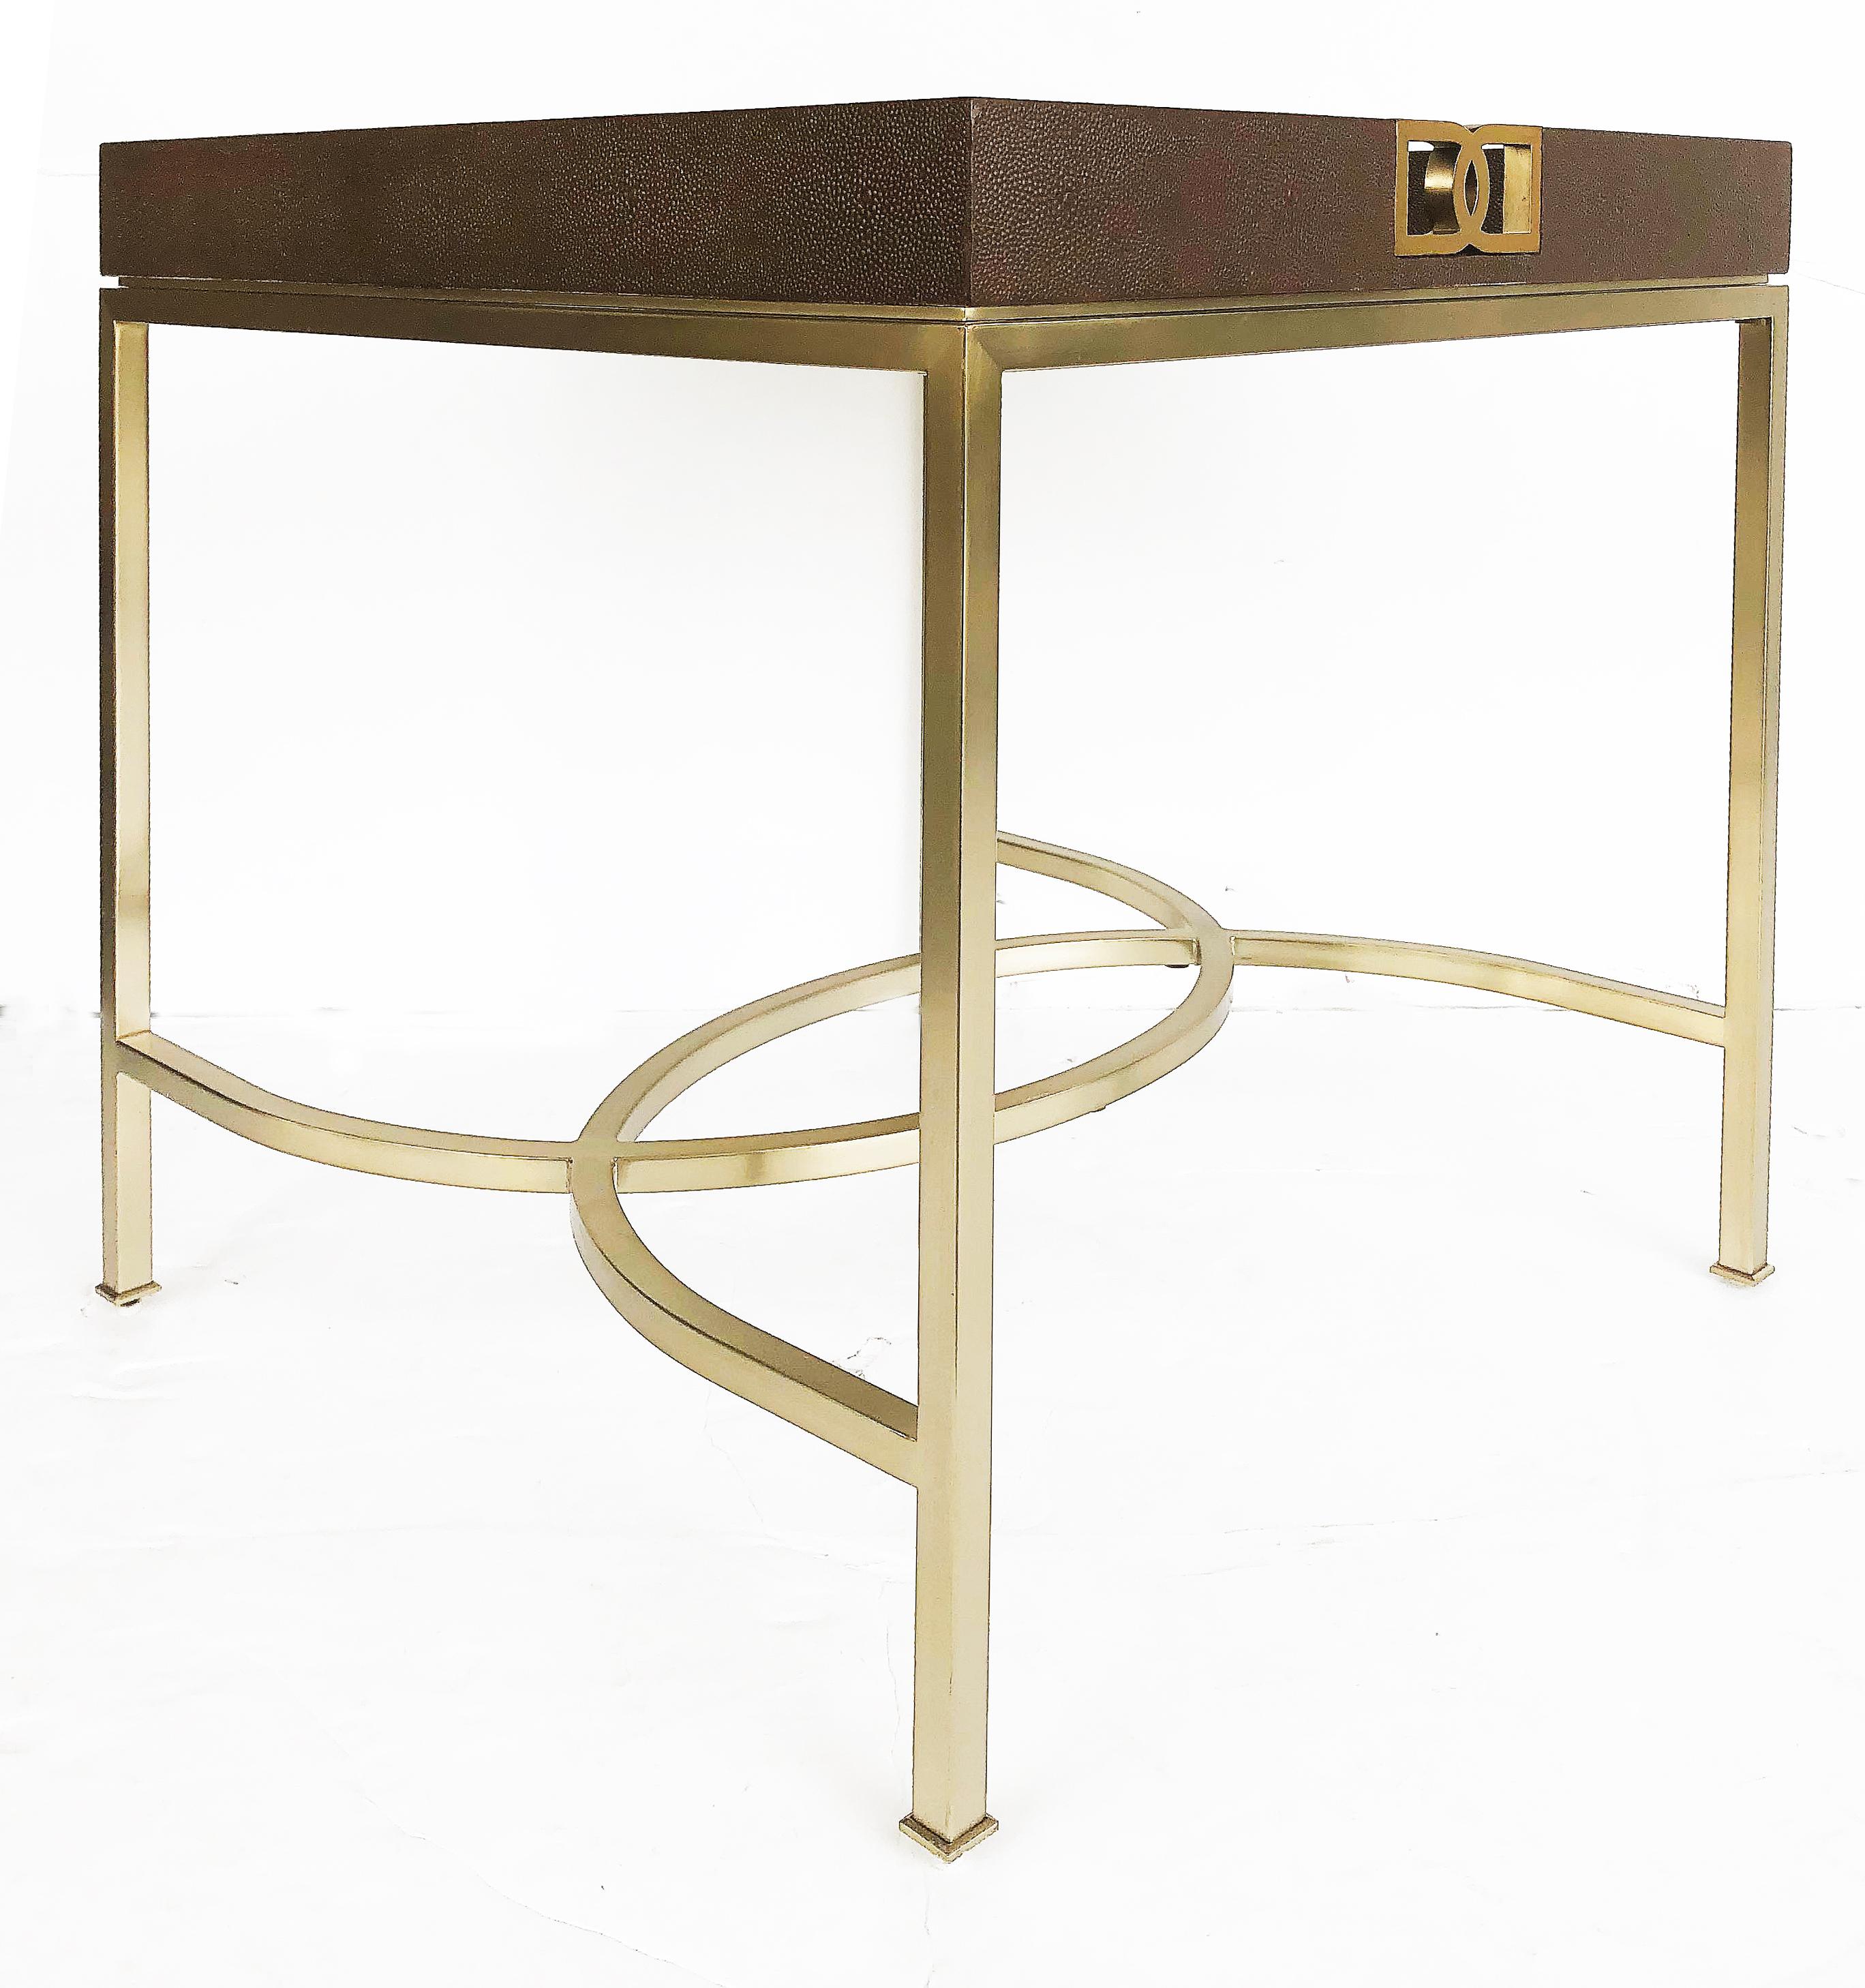 Modern Bernhardt Faux Shagreen and Brass Coffee Table in Chocolate